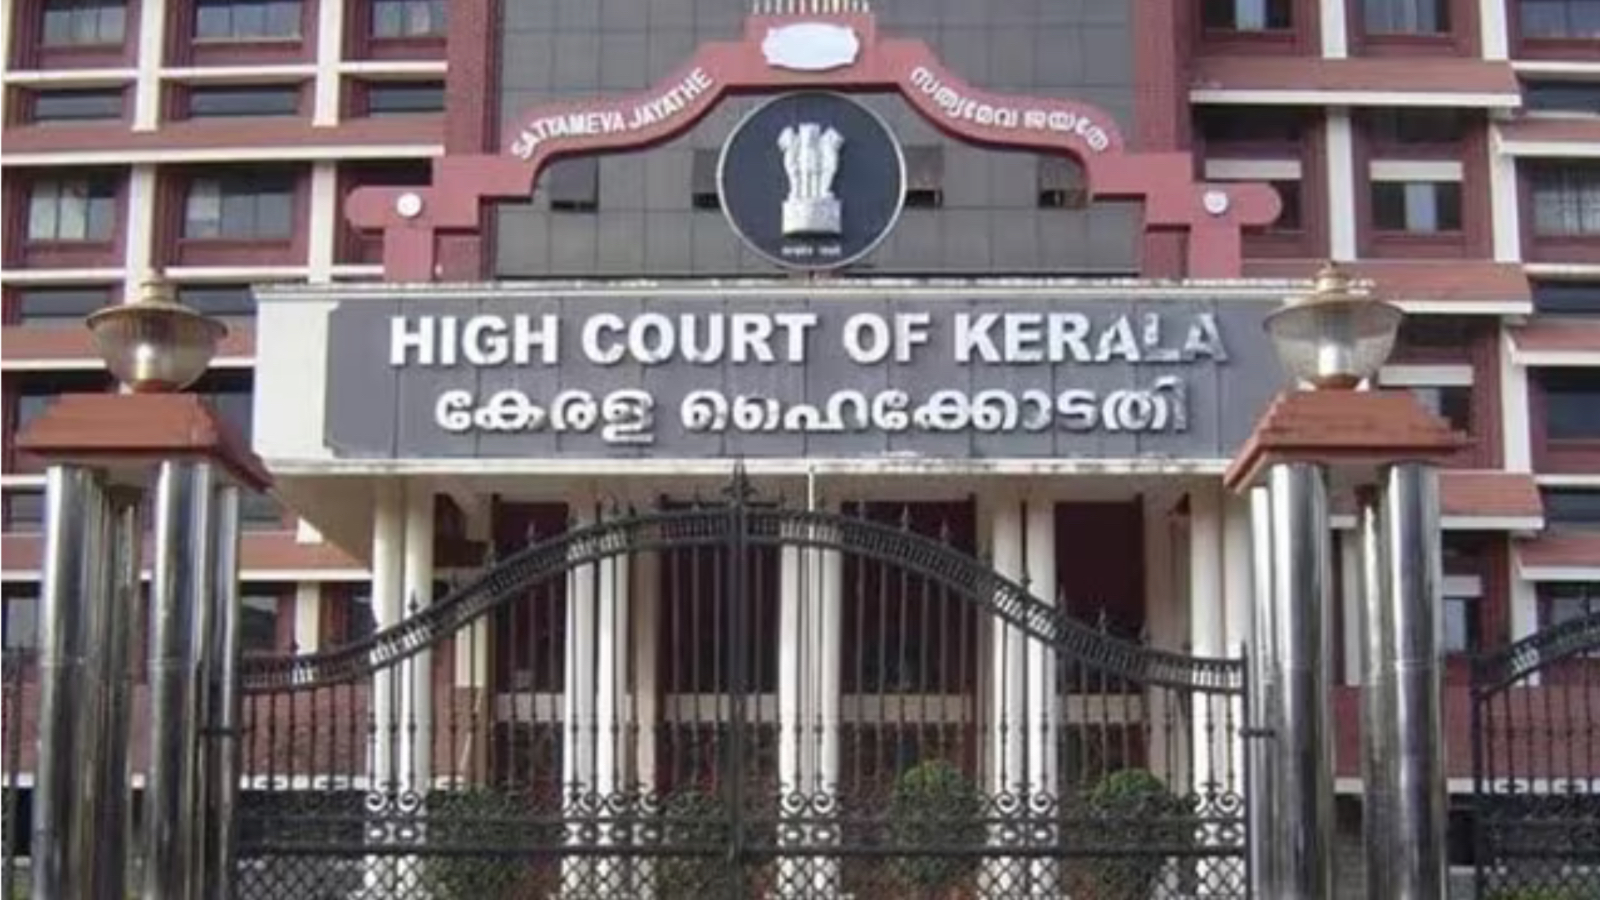 No movie reviews within 48 hours of release, says amicus curiae appointed  by Kerala High Court